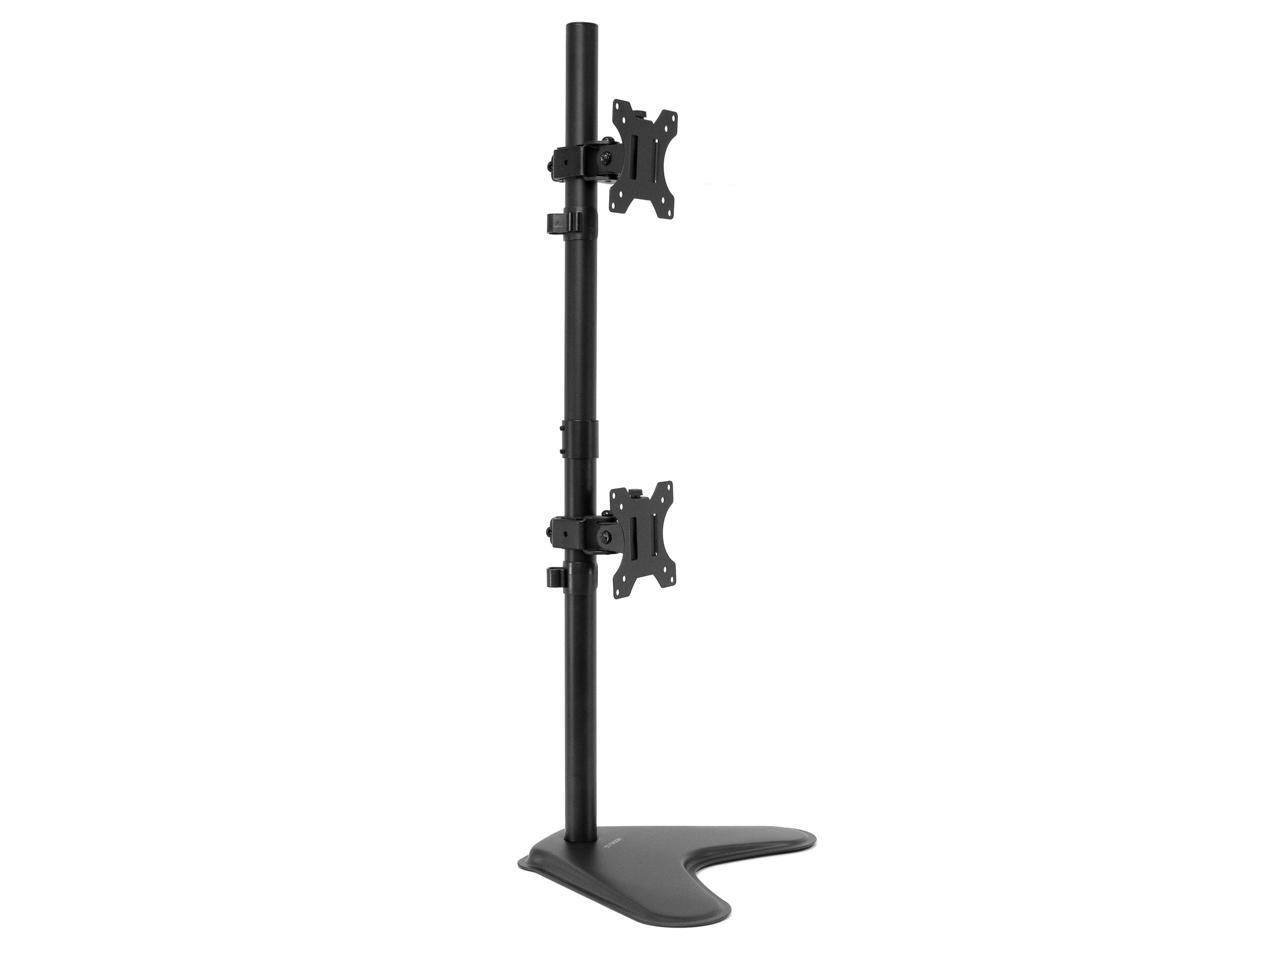 Mount-It! Vertical Dual Monitor Desk Stand (Up to 32" Screens) $5.40 + Free Shipping